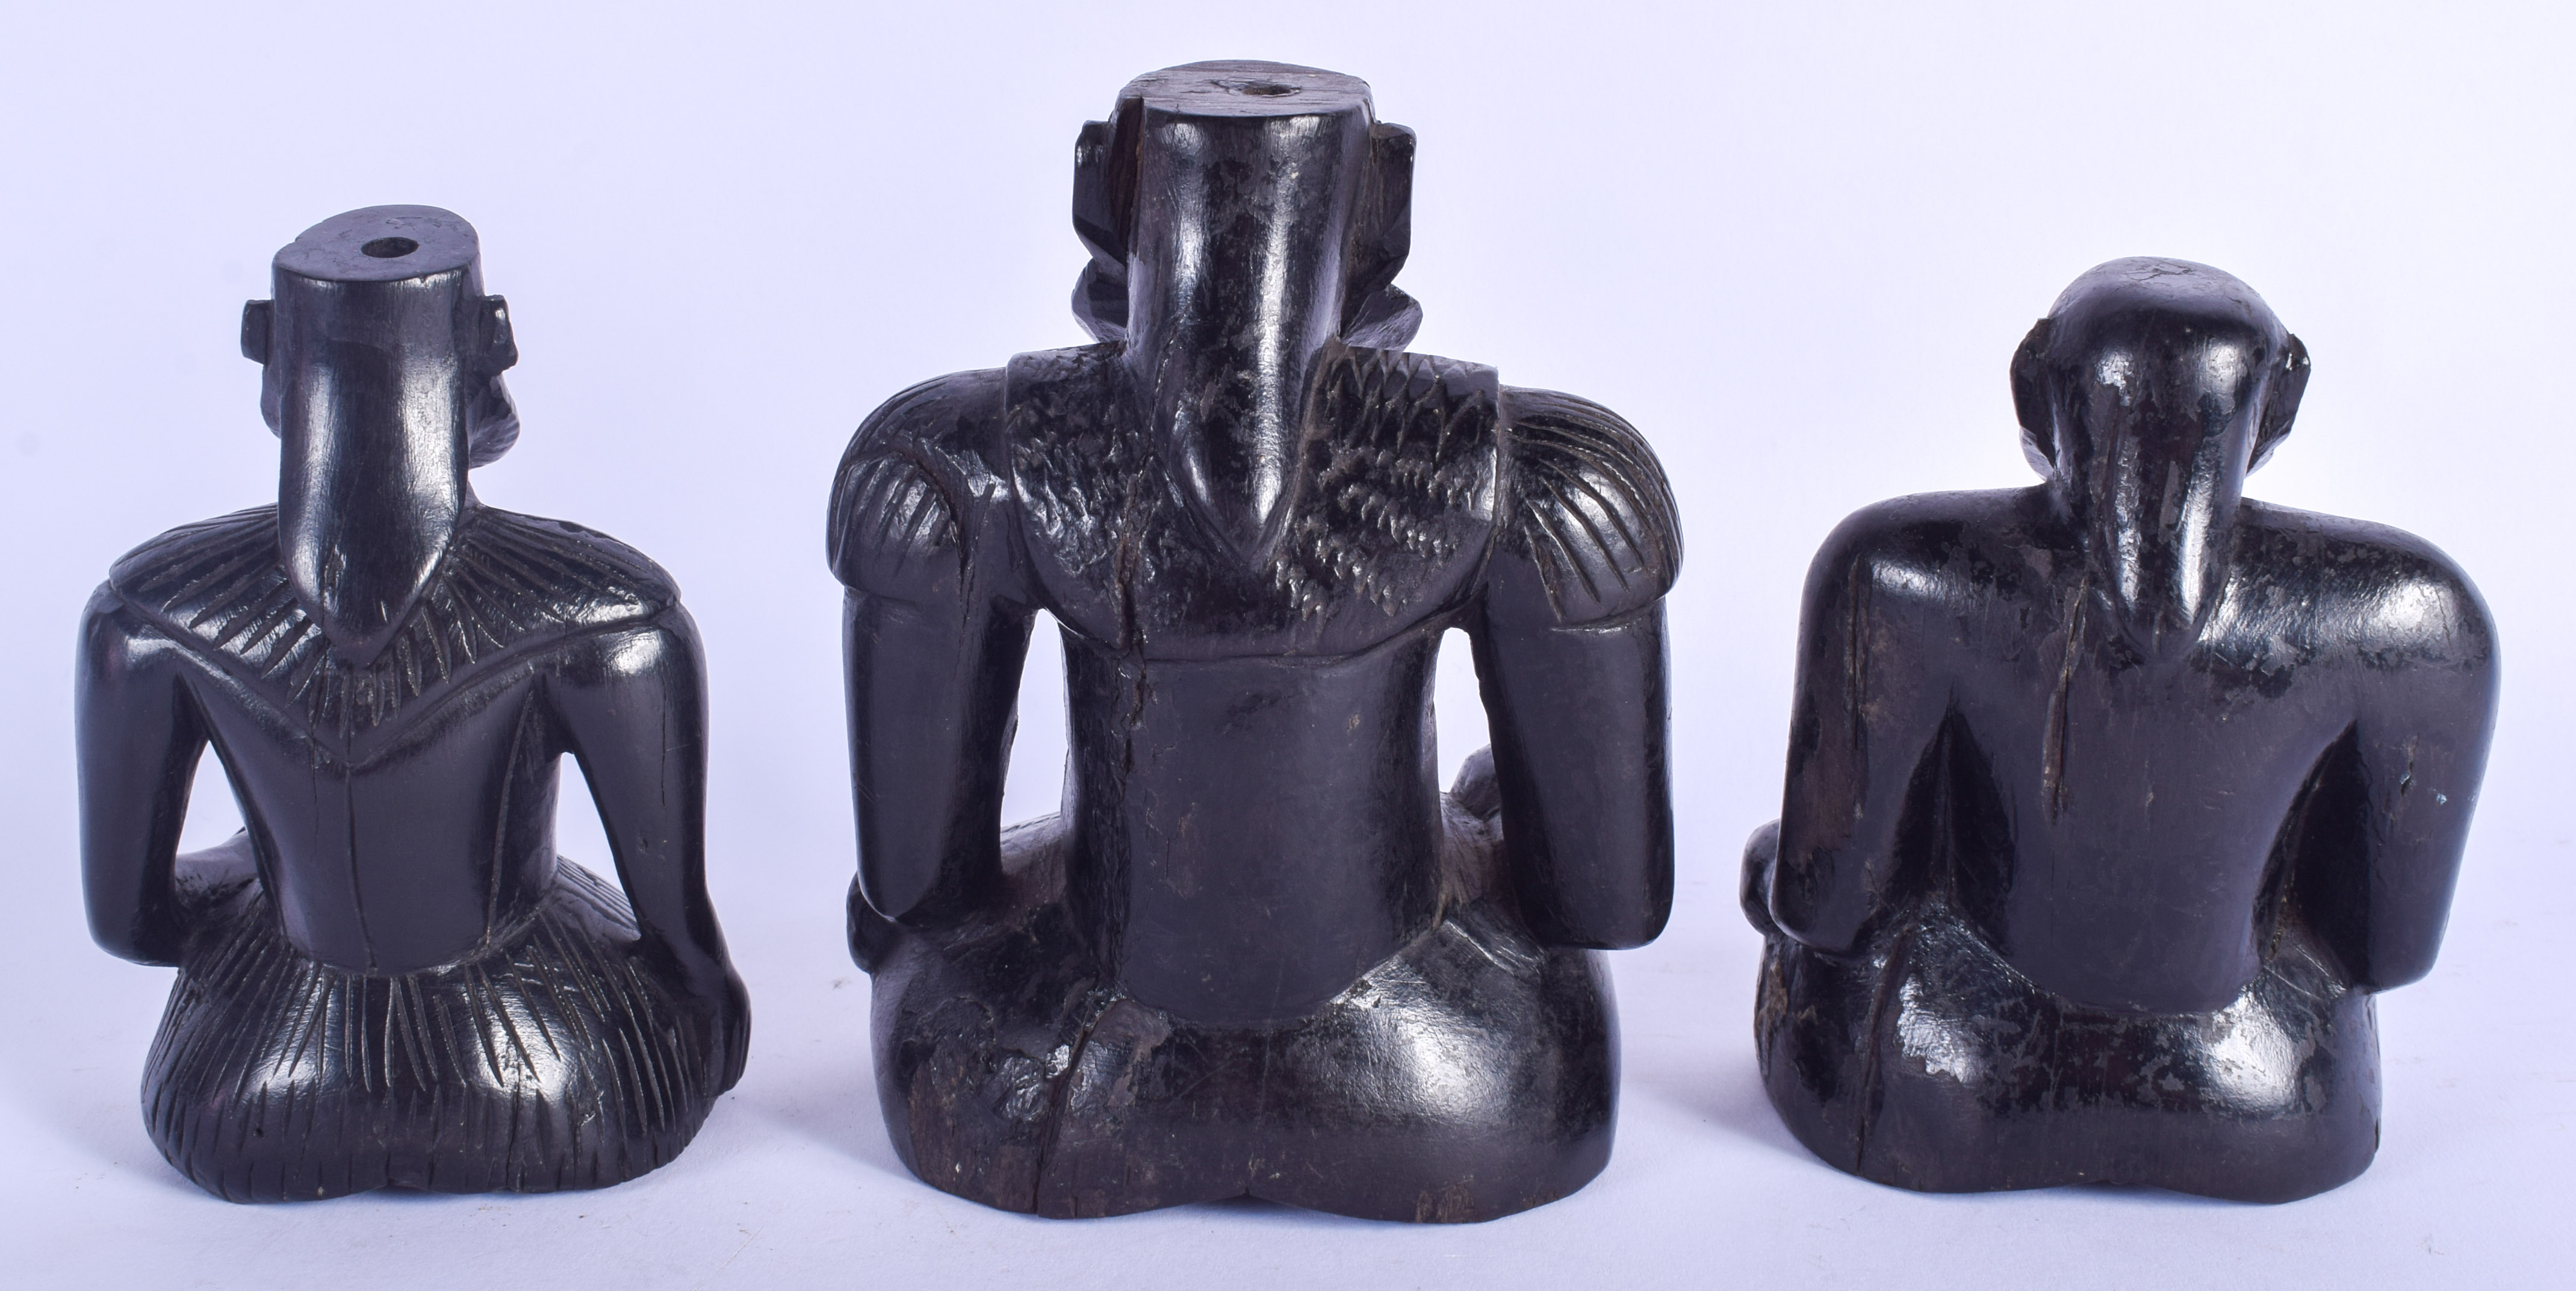 A VERY UNUSUAL SET OF THREE 19TH CENTURY CARVED HARDWOOD FIGURES modelled as Elizabethan style figur - Image 2 of 3